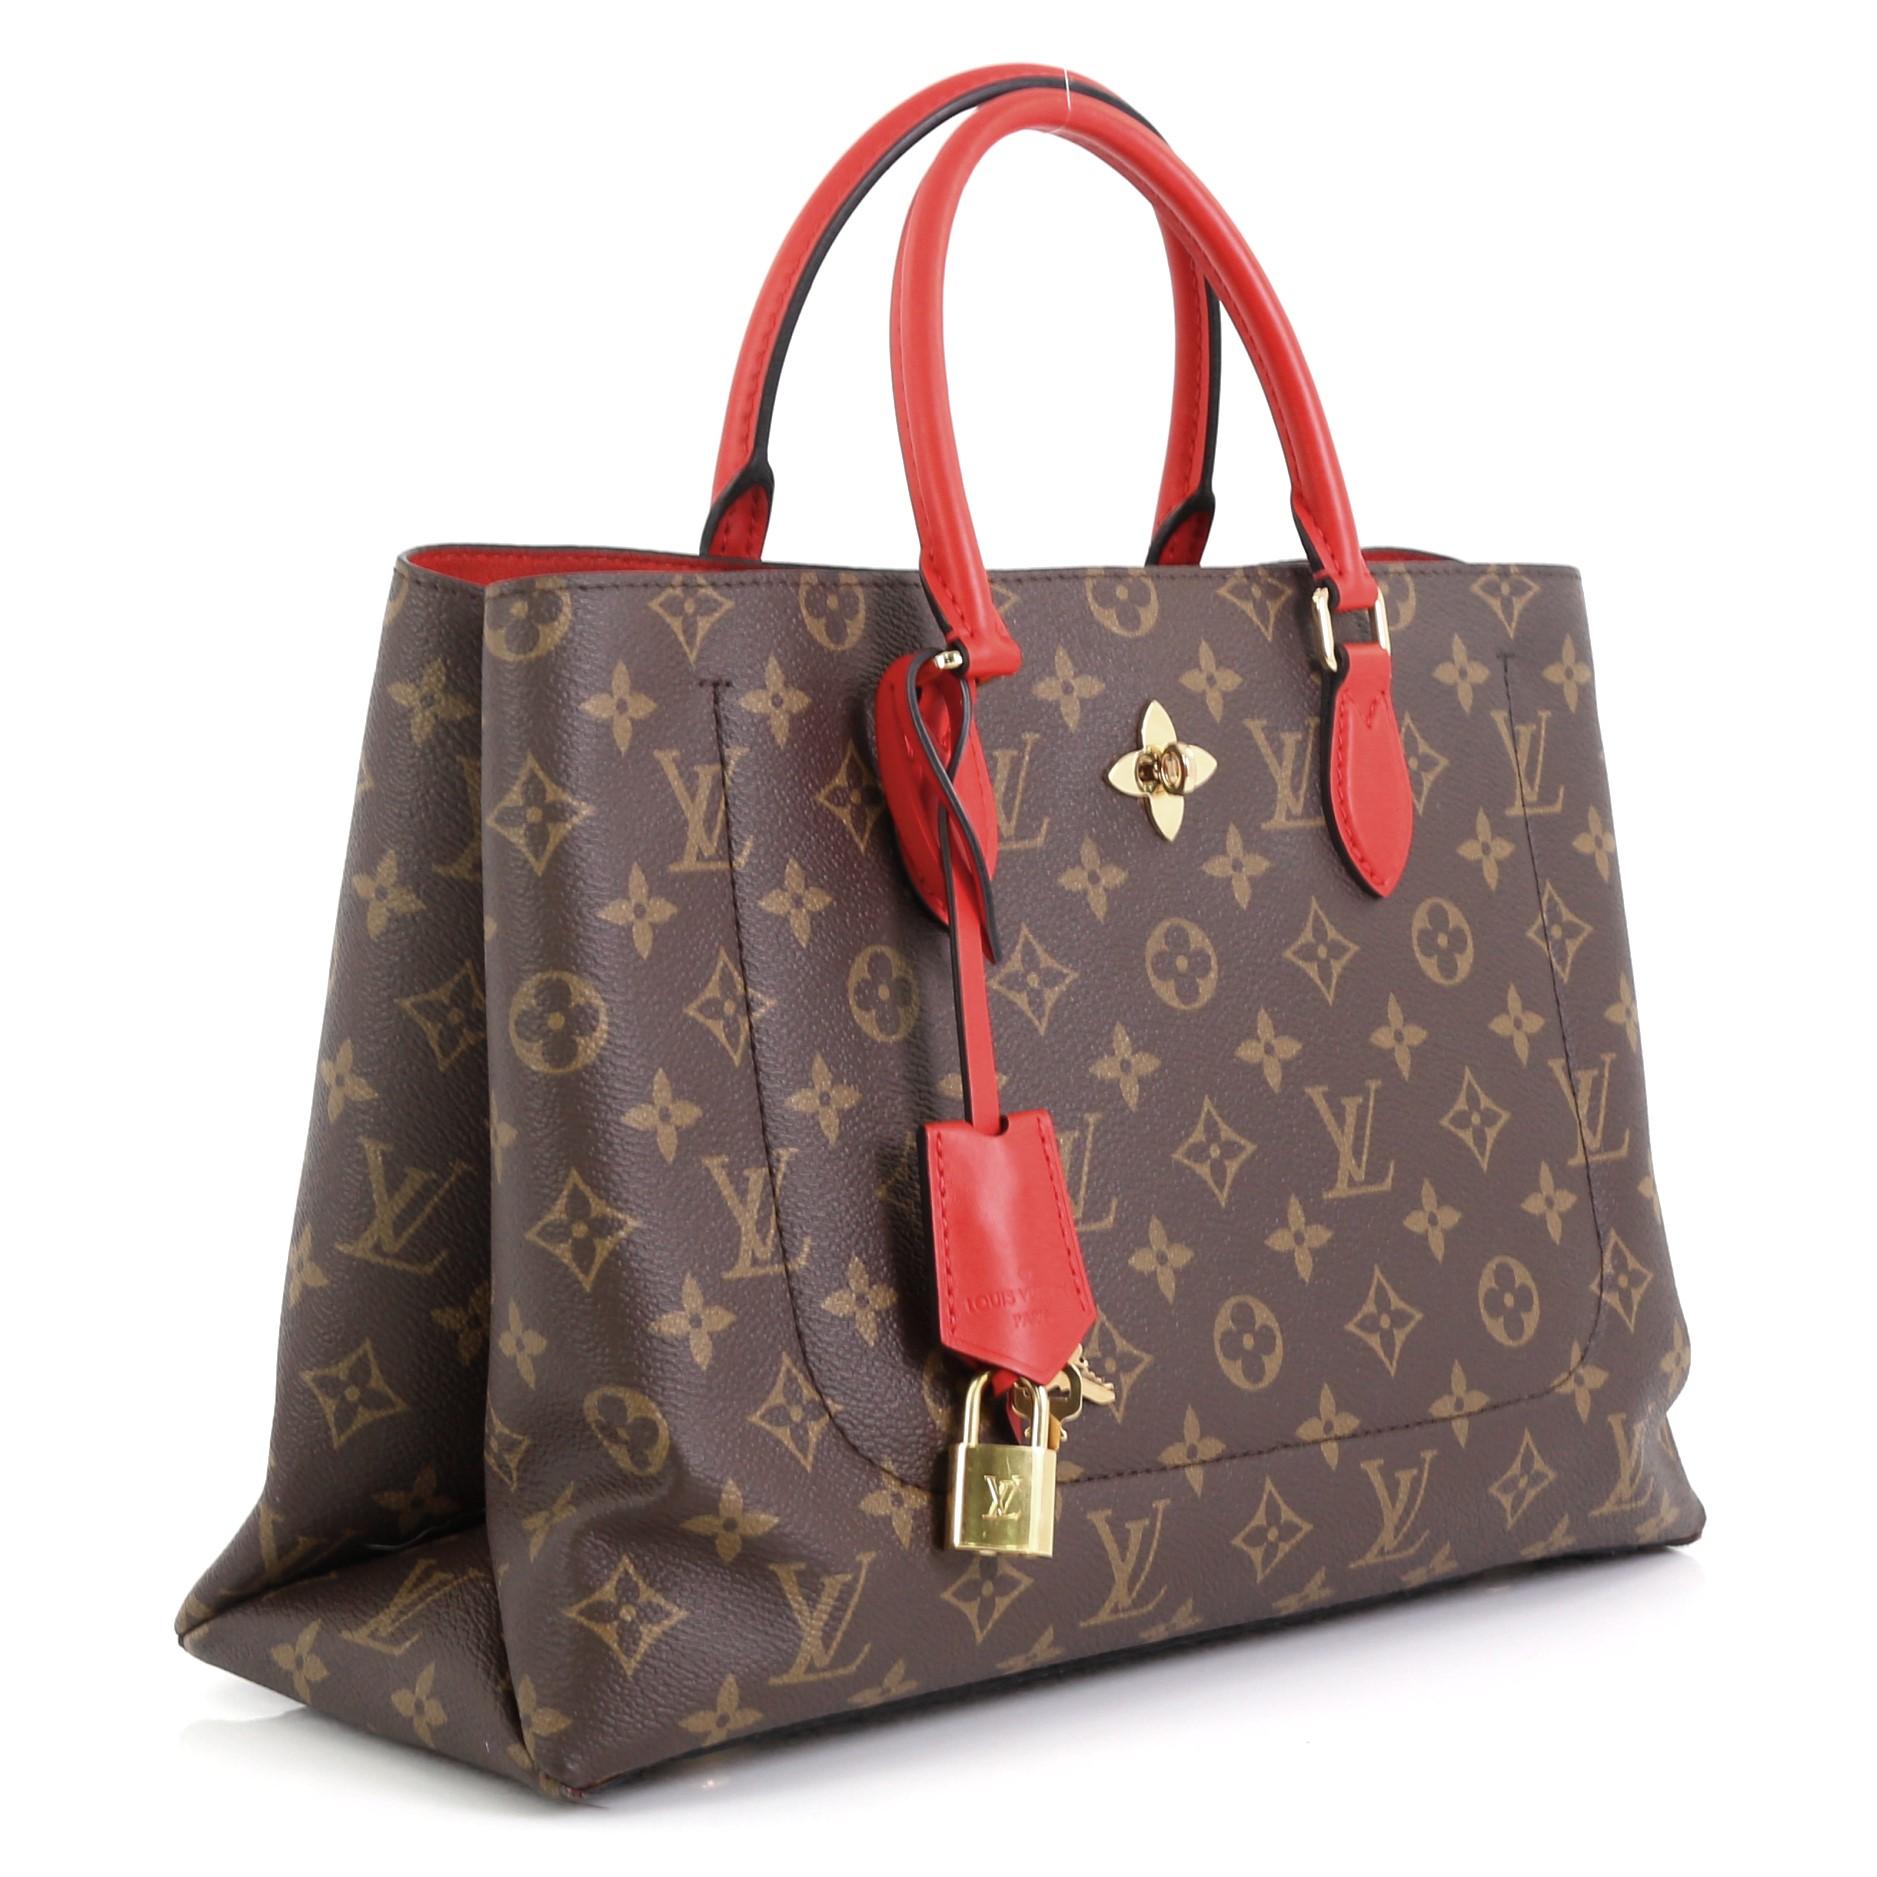 This Louis Vuitton Flower Tote Monogram Canvas, crafted in brown monogram coated canvas, features dual rolled leather handles, monogram flower padlock, and gold-tone hardware. It opens to a red microfiber interior with a center zip compartment and